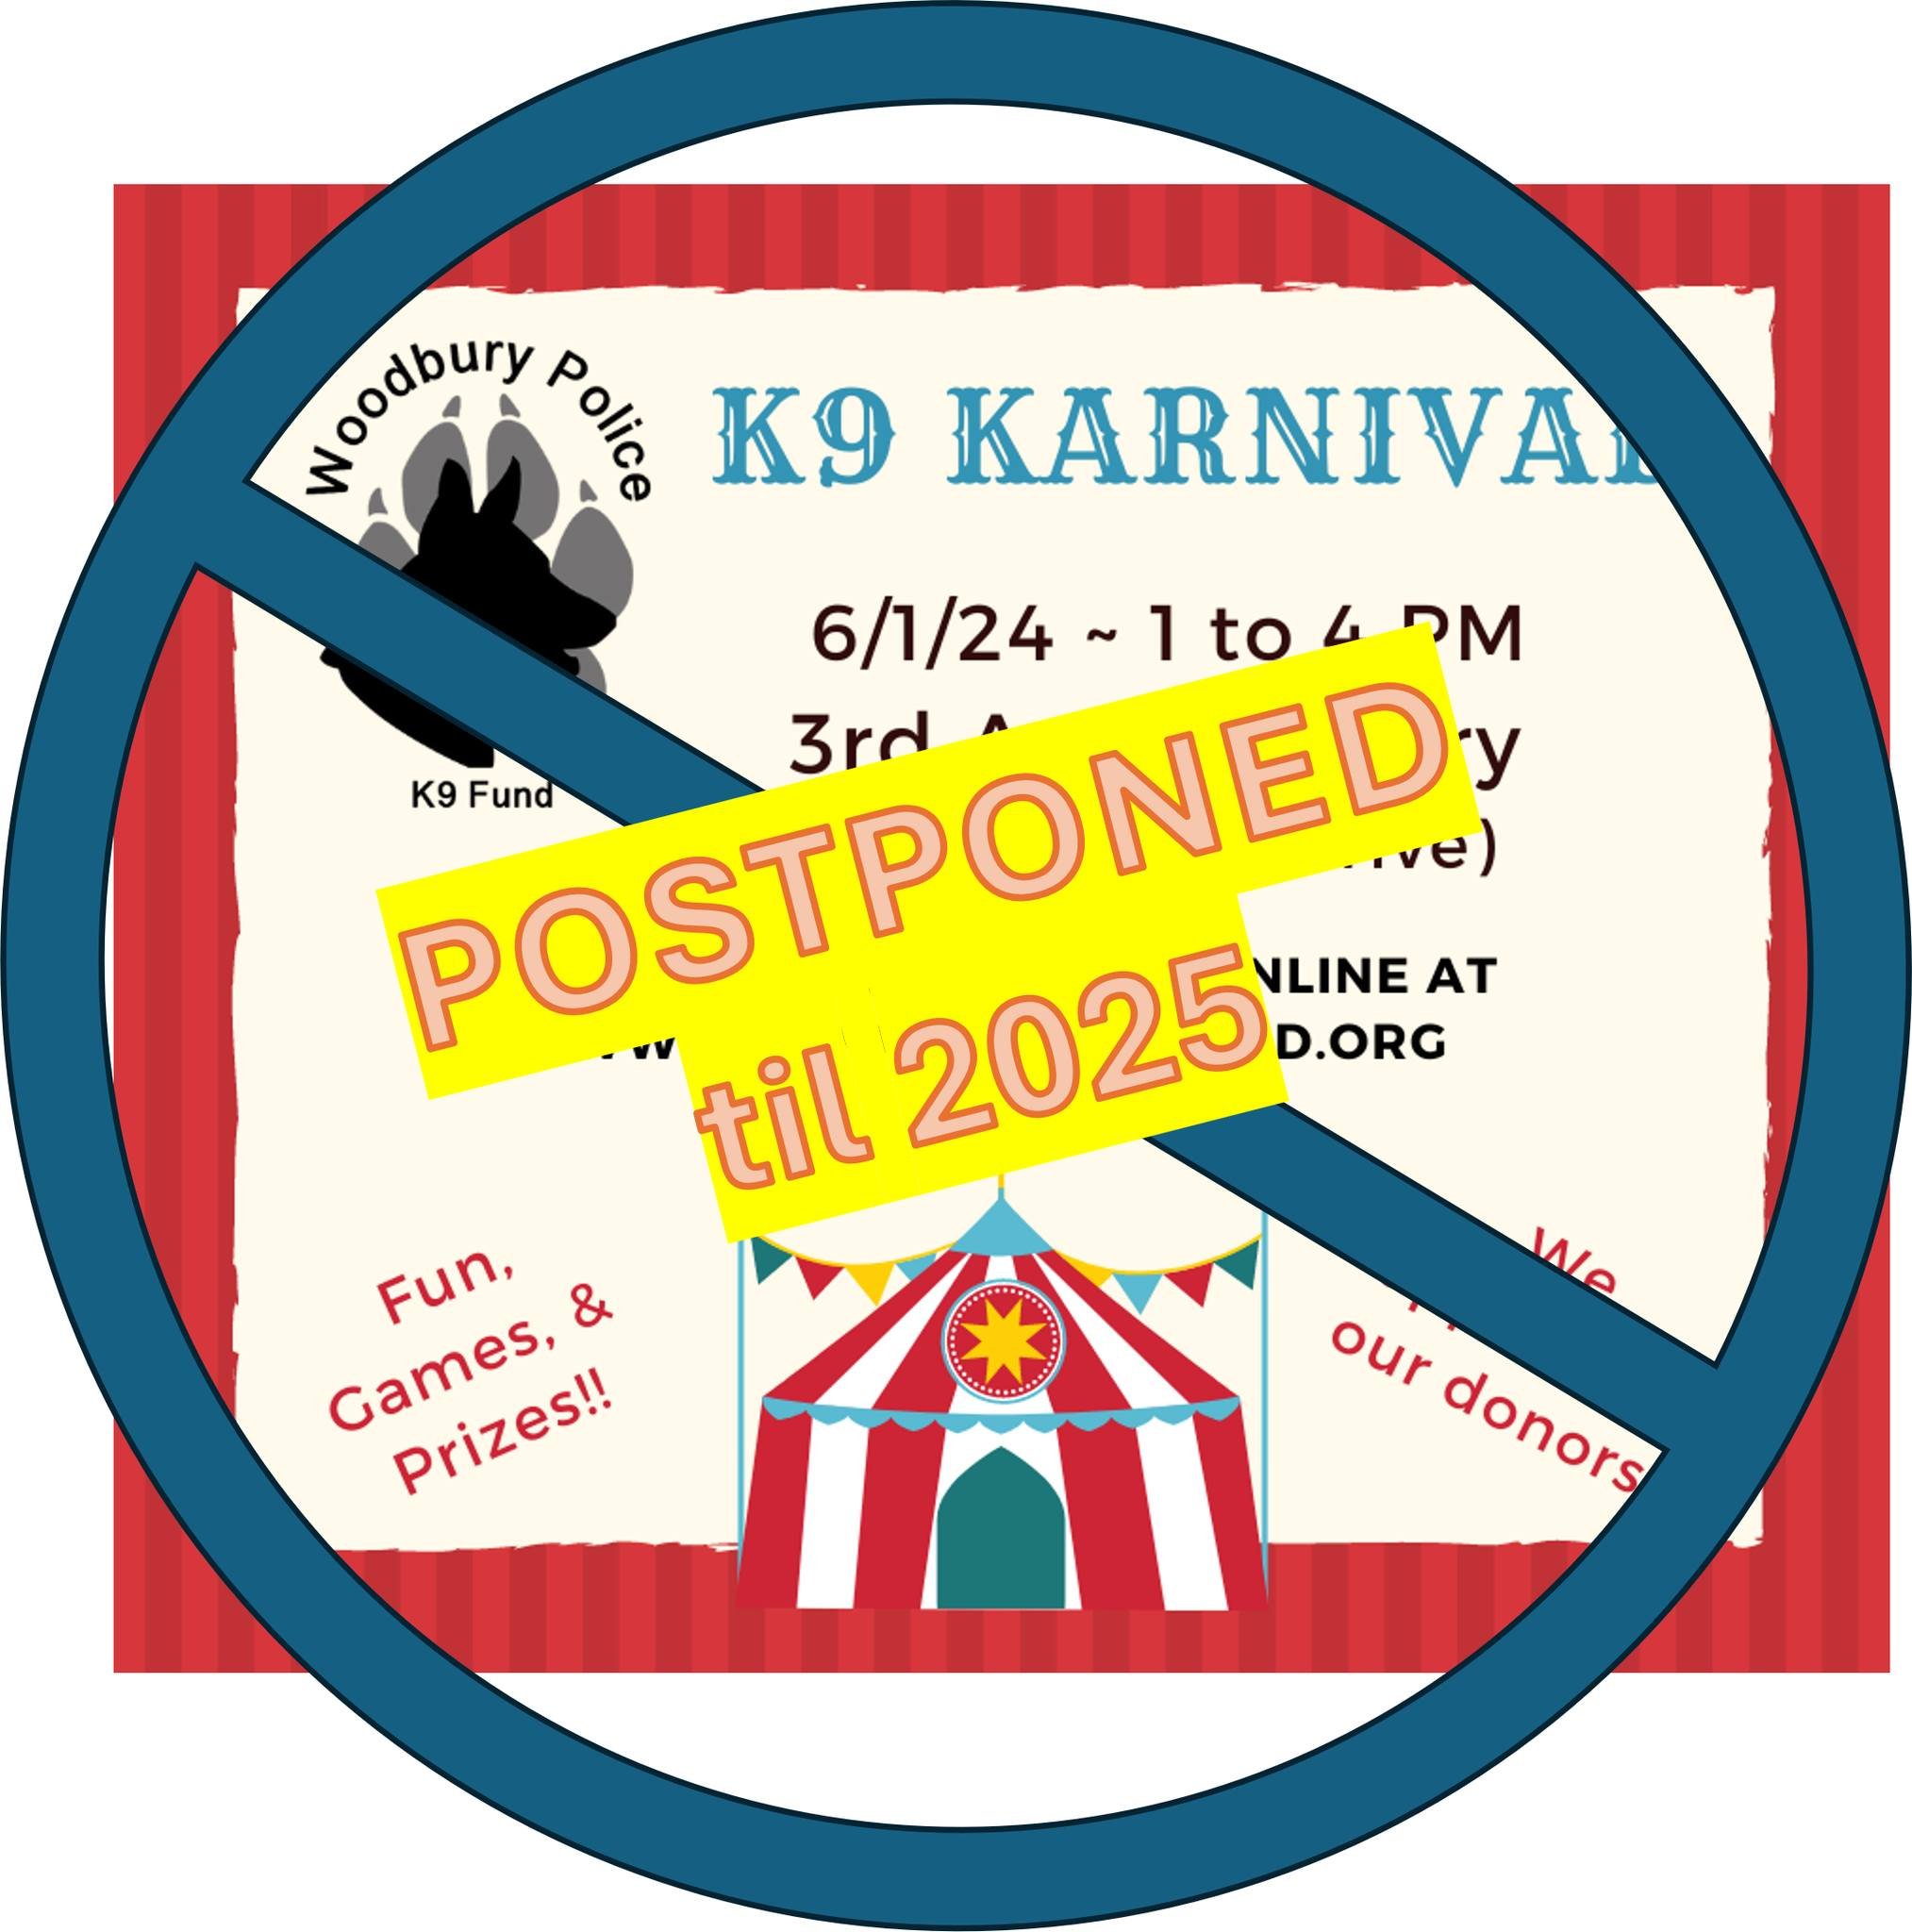 Hi Friends. We are sad to inform you that we are postponing our K9 Karnival until 2025. Thank you for your support! If you would like to support the Woodbury Police K9 Fund, please visit our website: https://www.woodburyk9fund.org/donation

#k9fund #